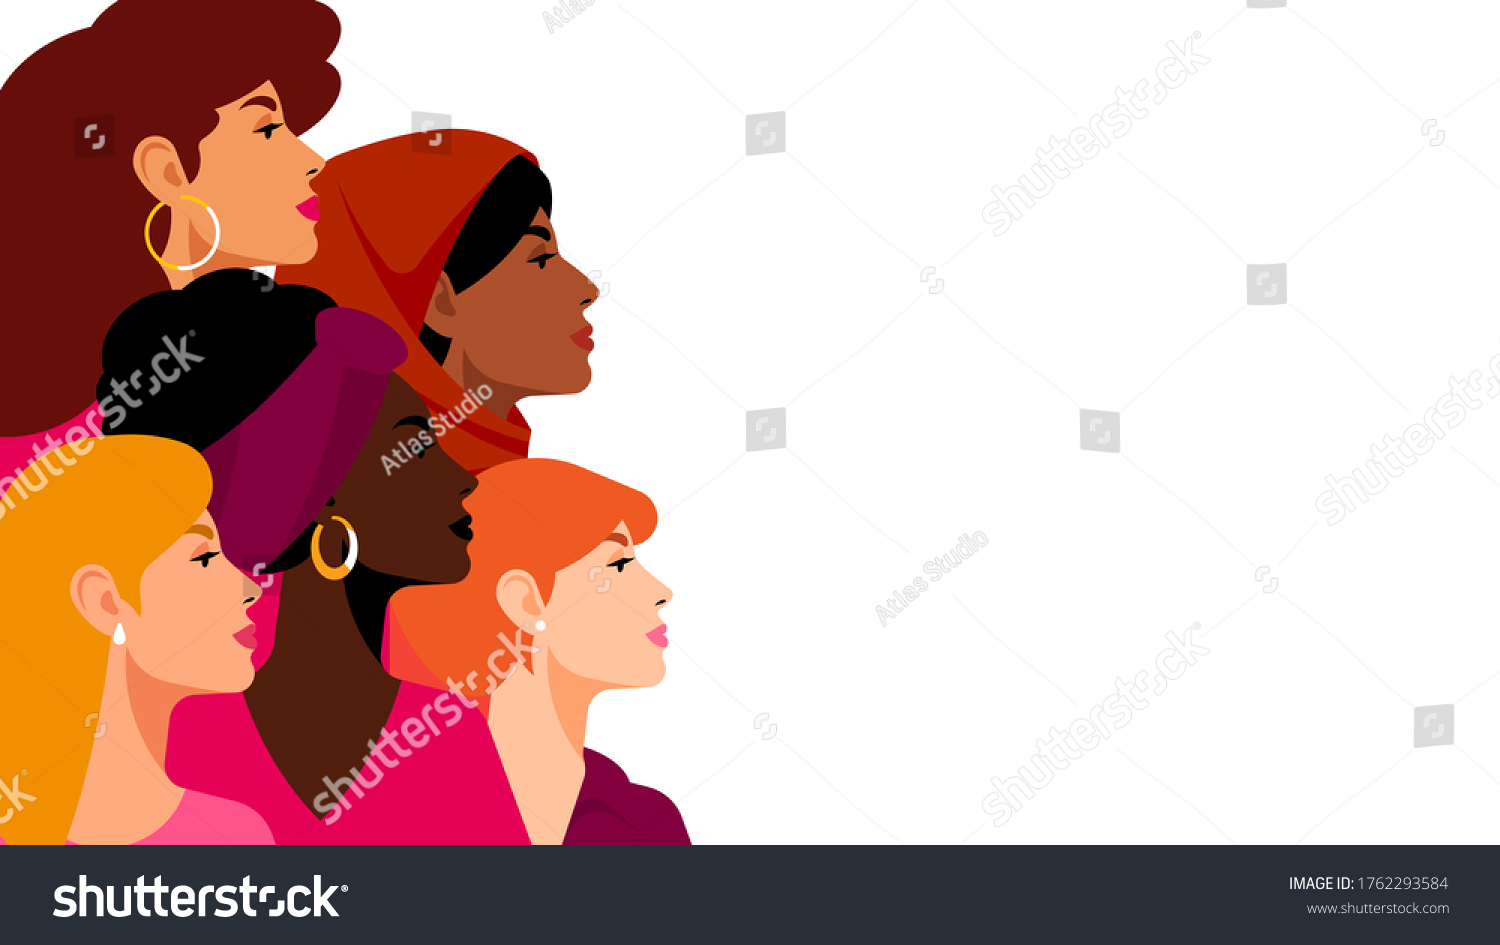 Multi-ethnic women. A group of beautiful women with different beauty, hair and skin color. The concept of women, femininity, diversity, independence and equality. Vector illustration. #1762293584